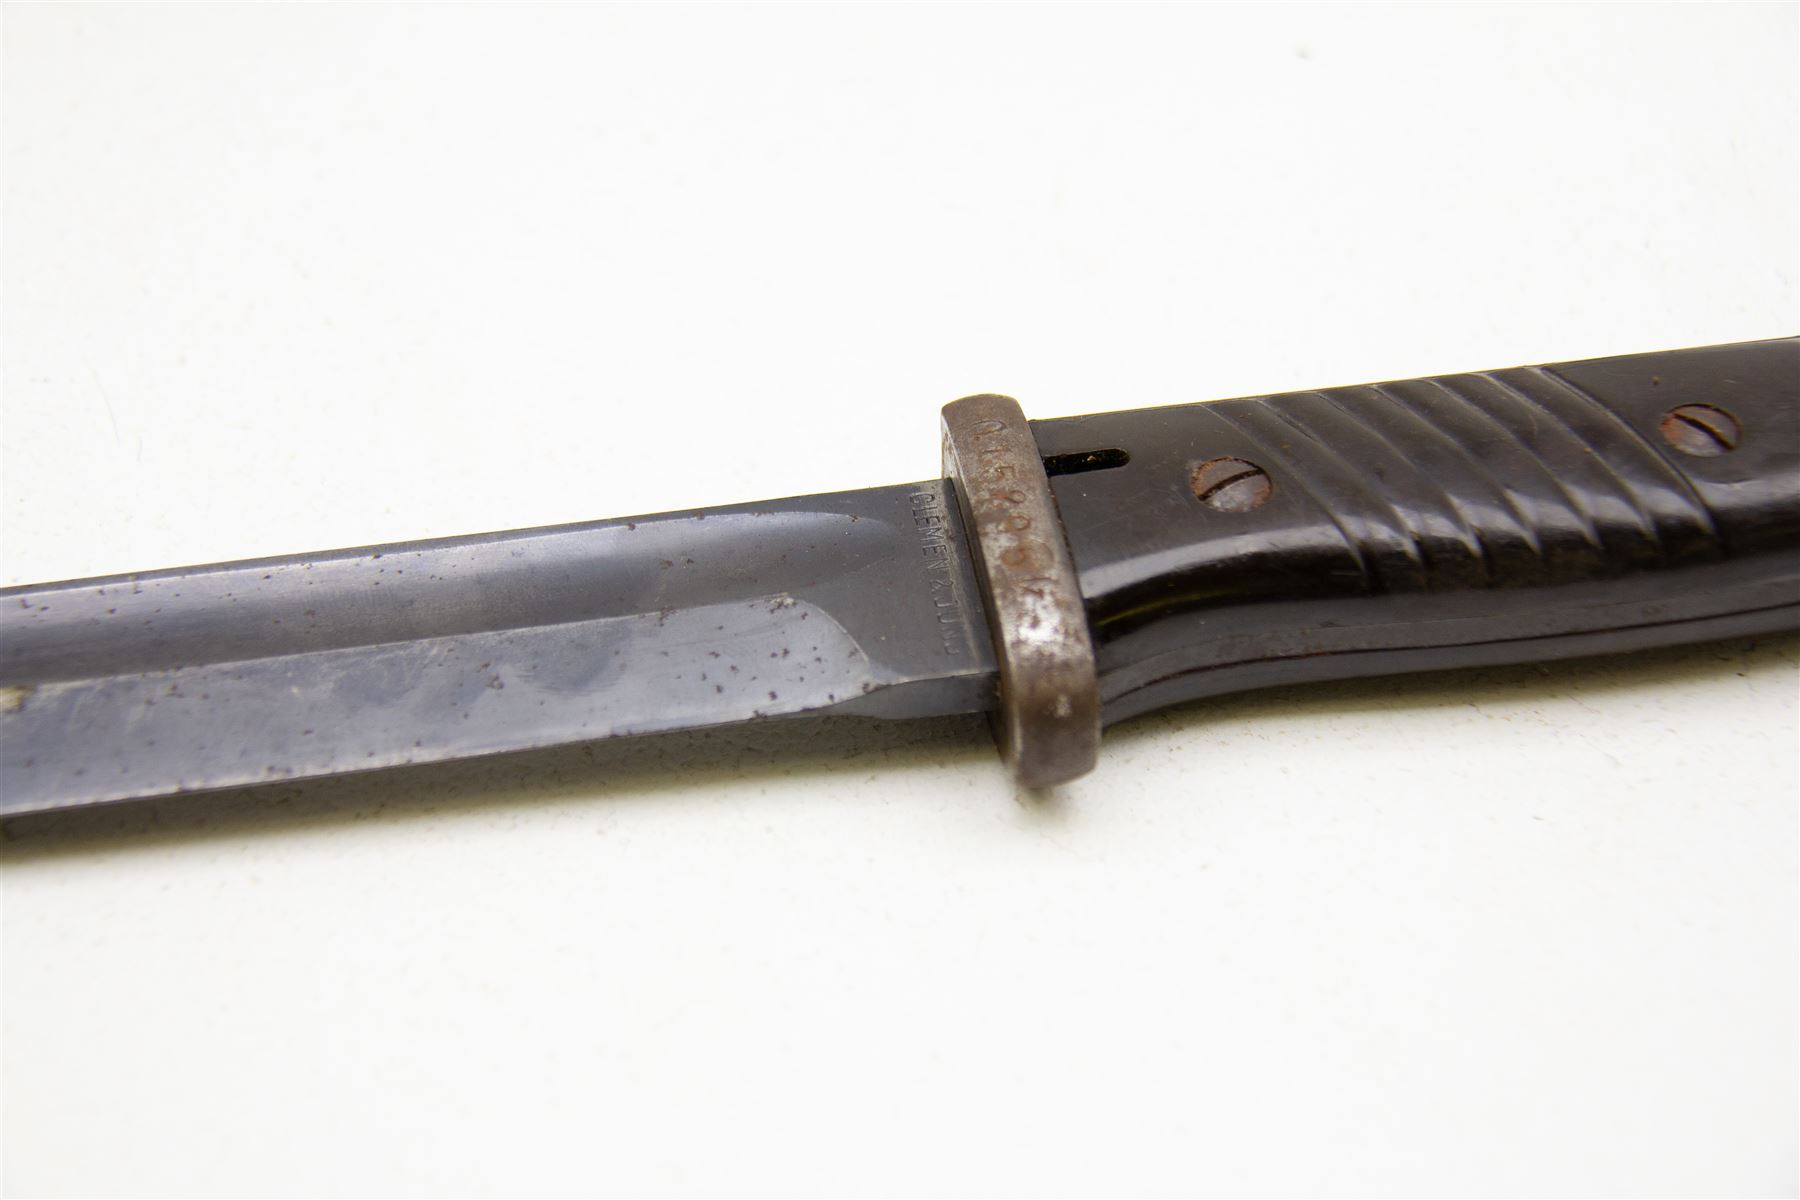 WWII German K98 bayonet by Clemen & Jung - Image 3 of 4